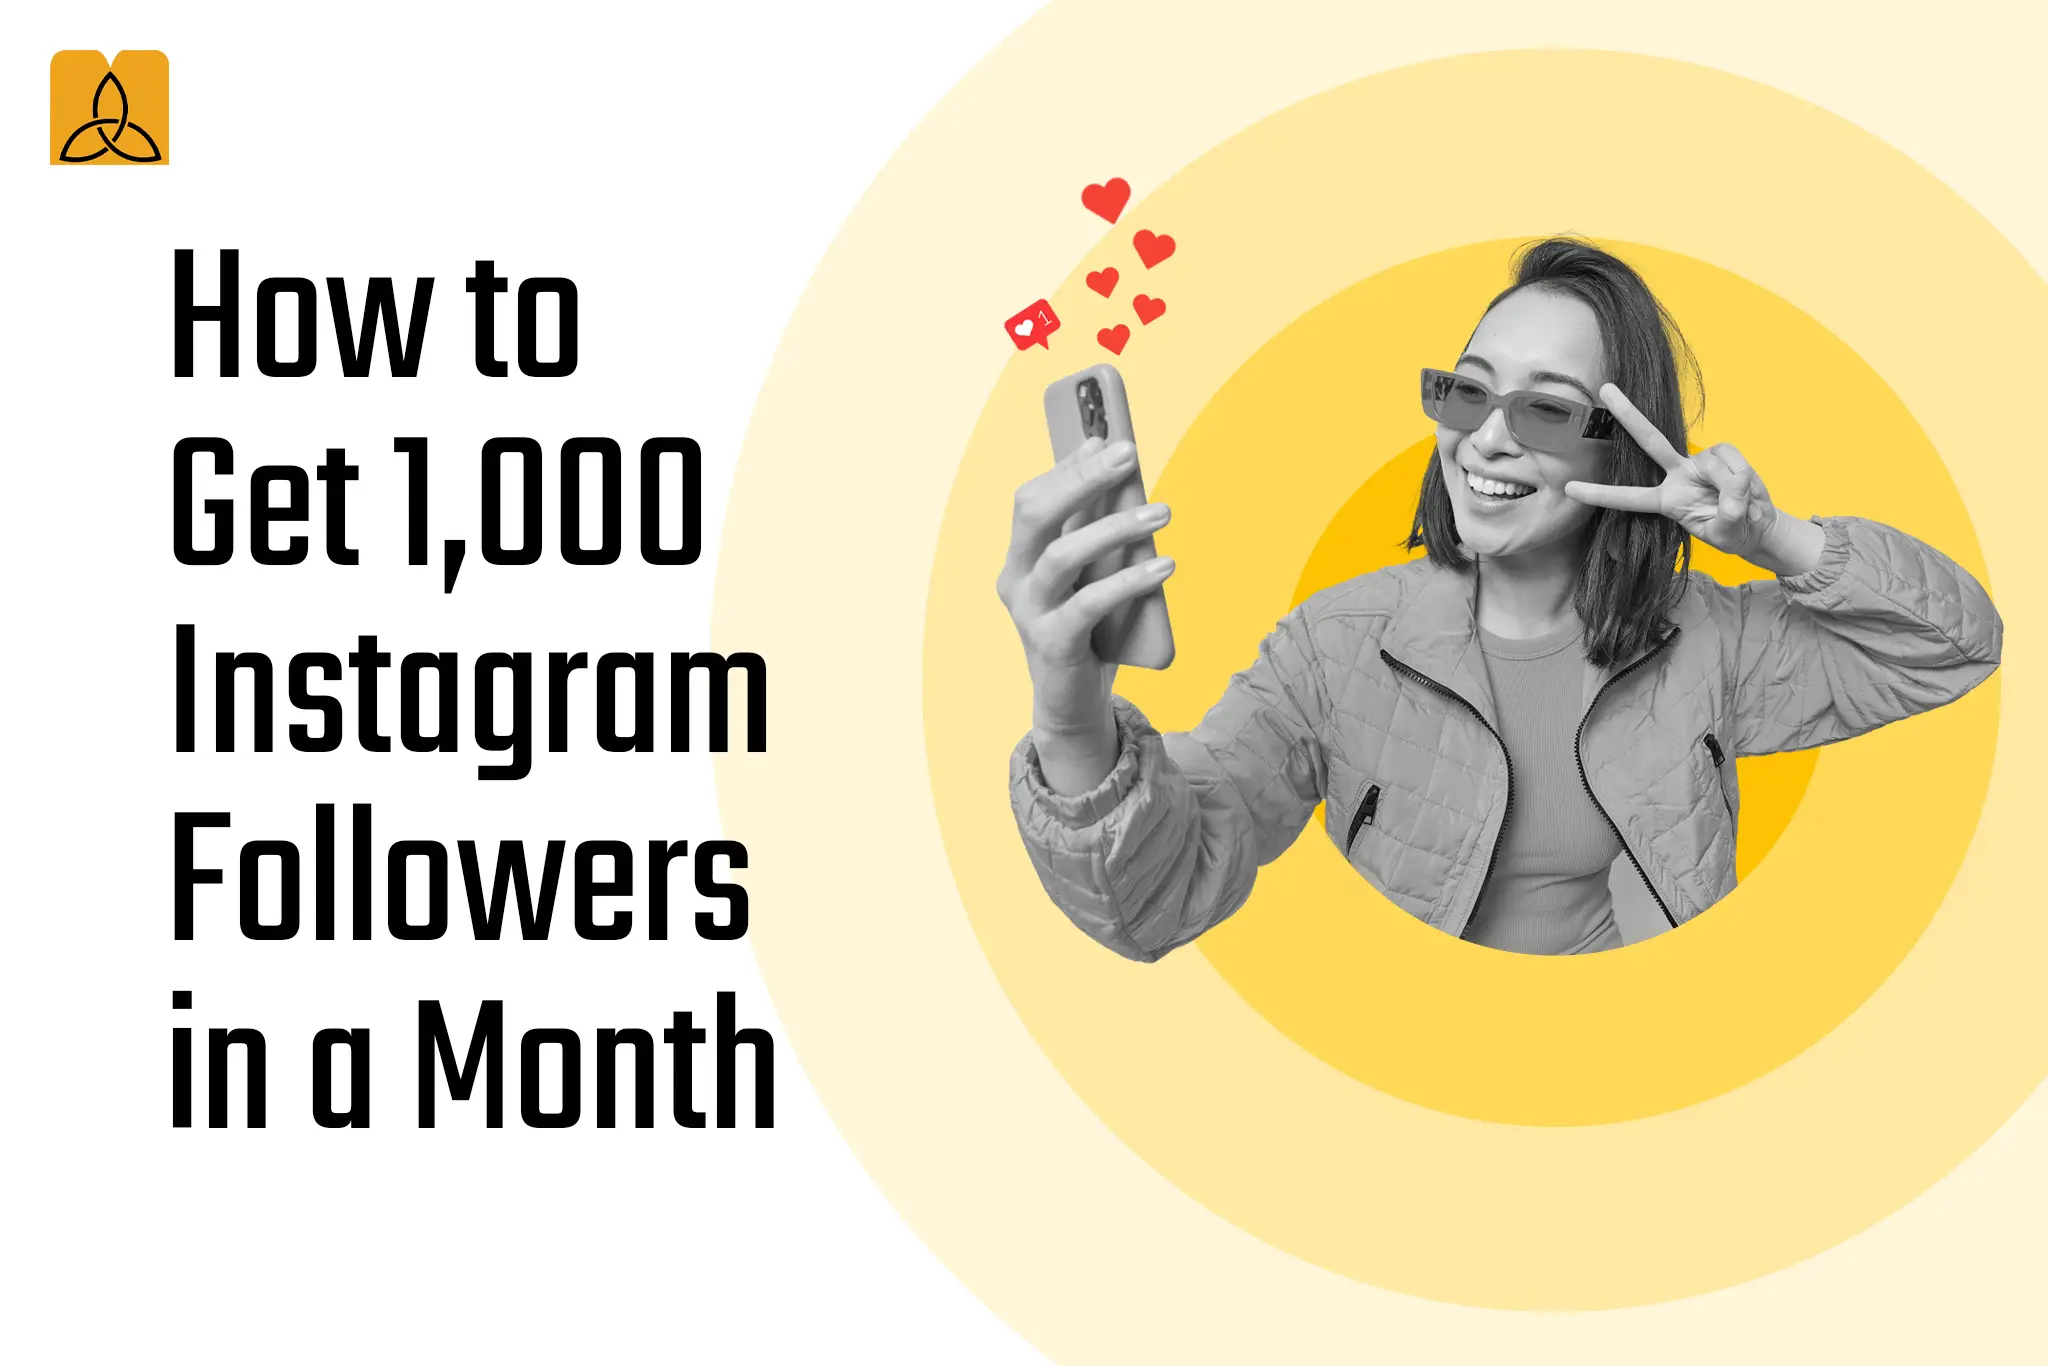 How to Get 1,000 Instagram Followers in a Month